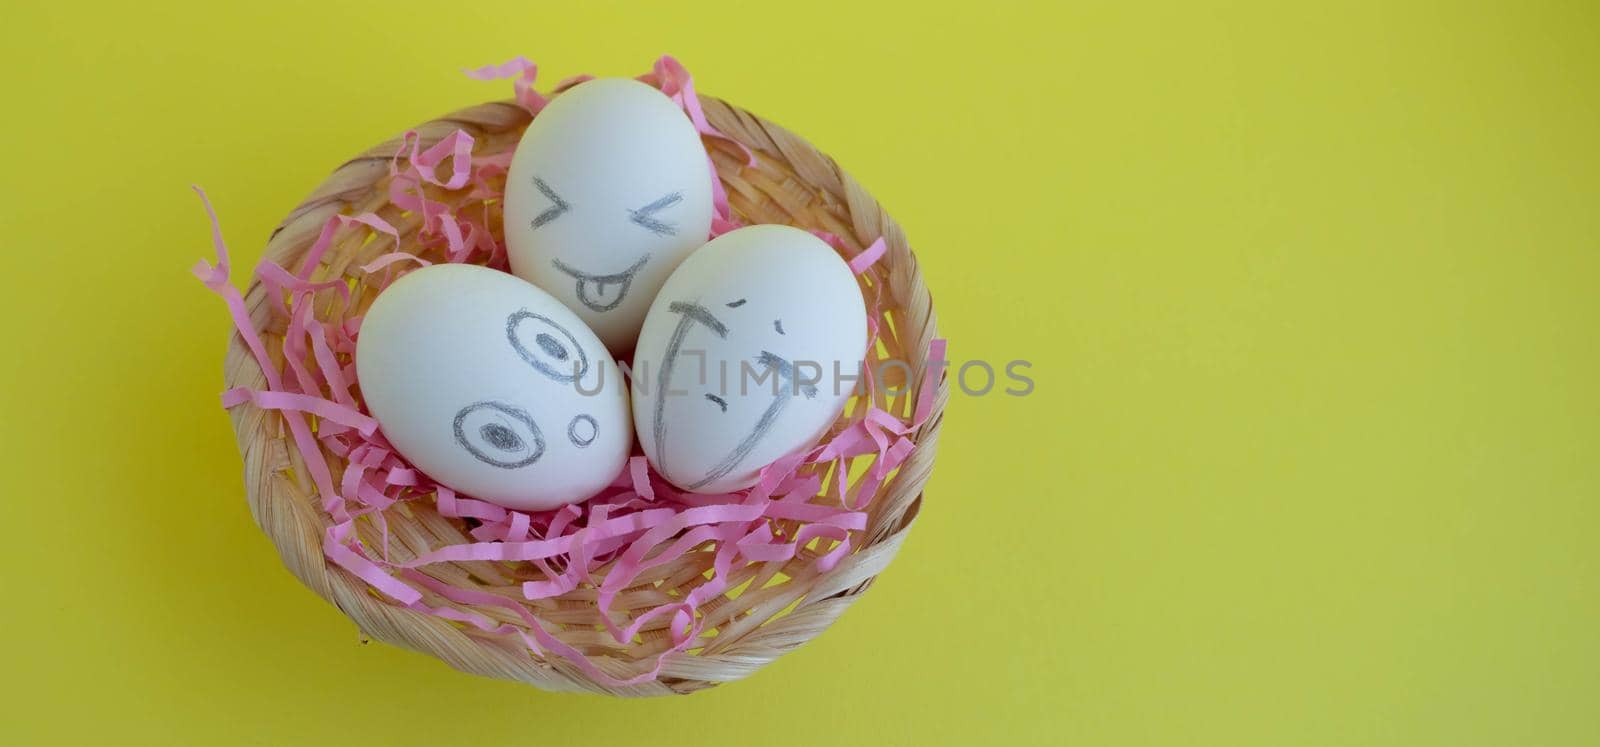 On the pink tinsel in the basket are three charming white eggs with faces on a yellow background. Easter Concept. Place for your text.